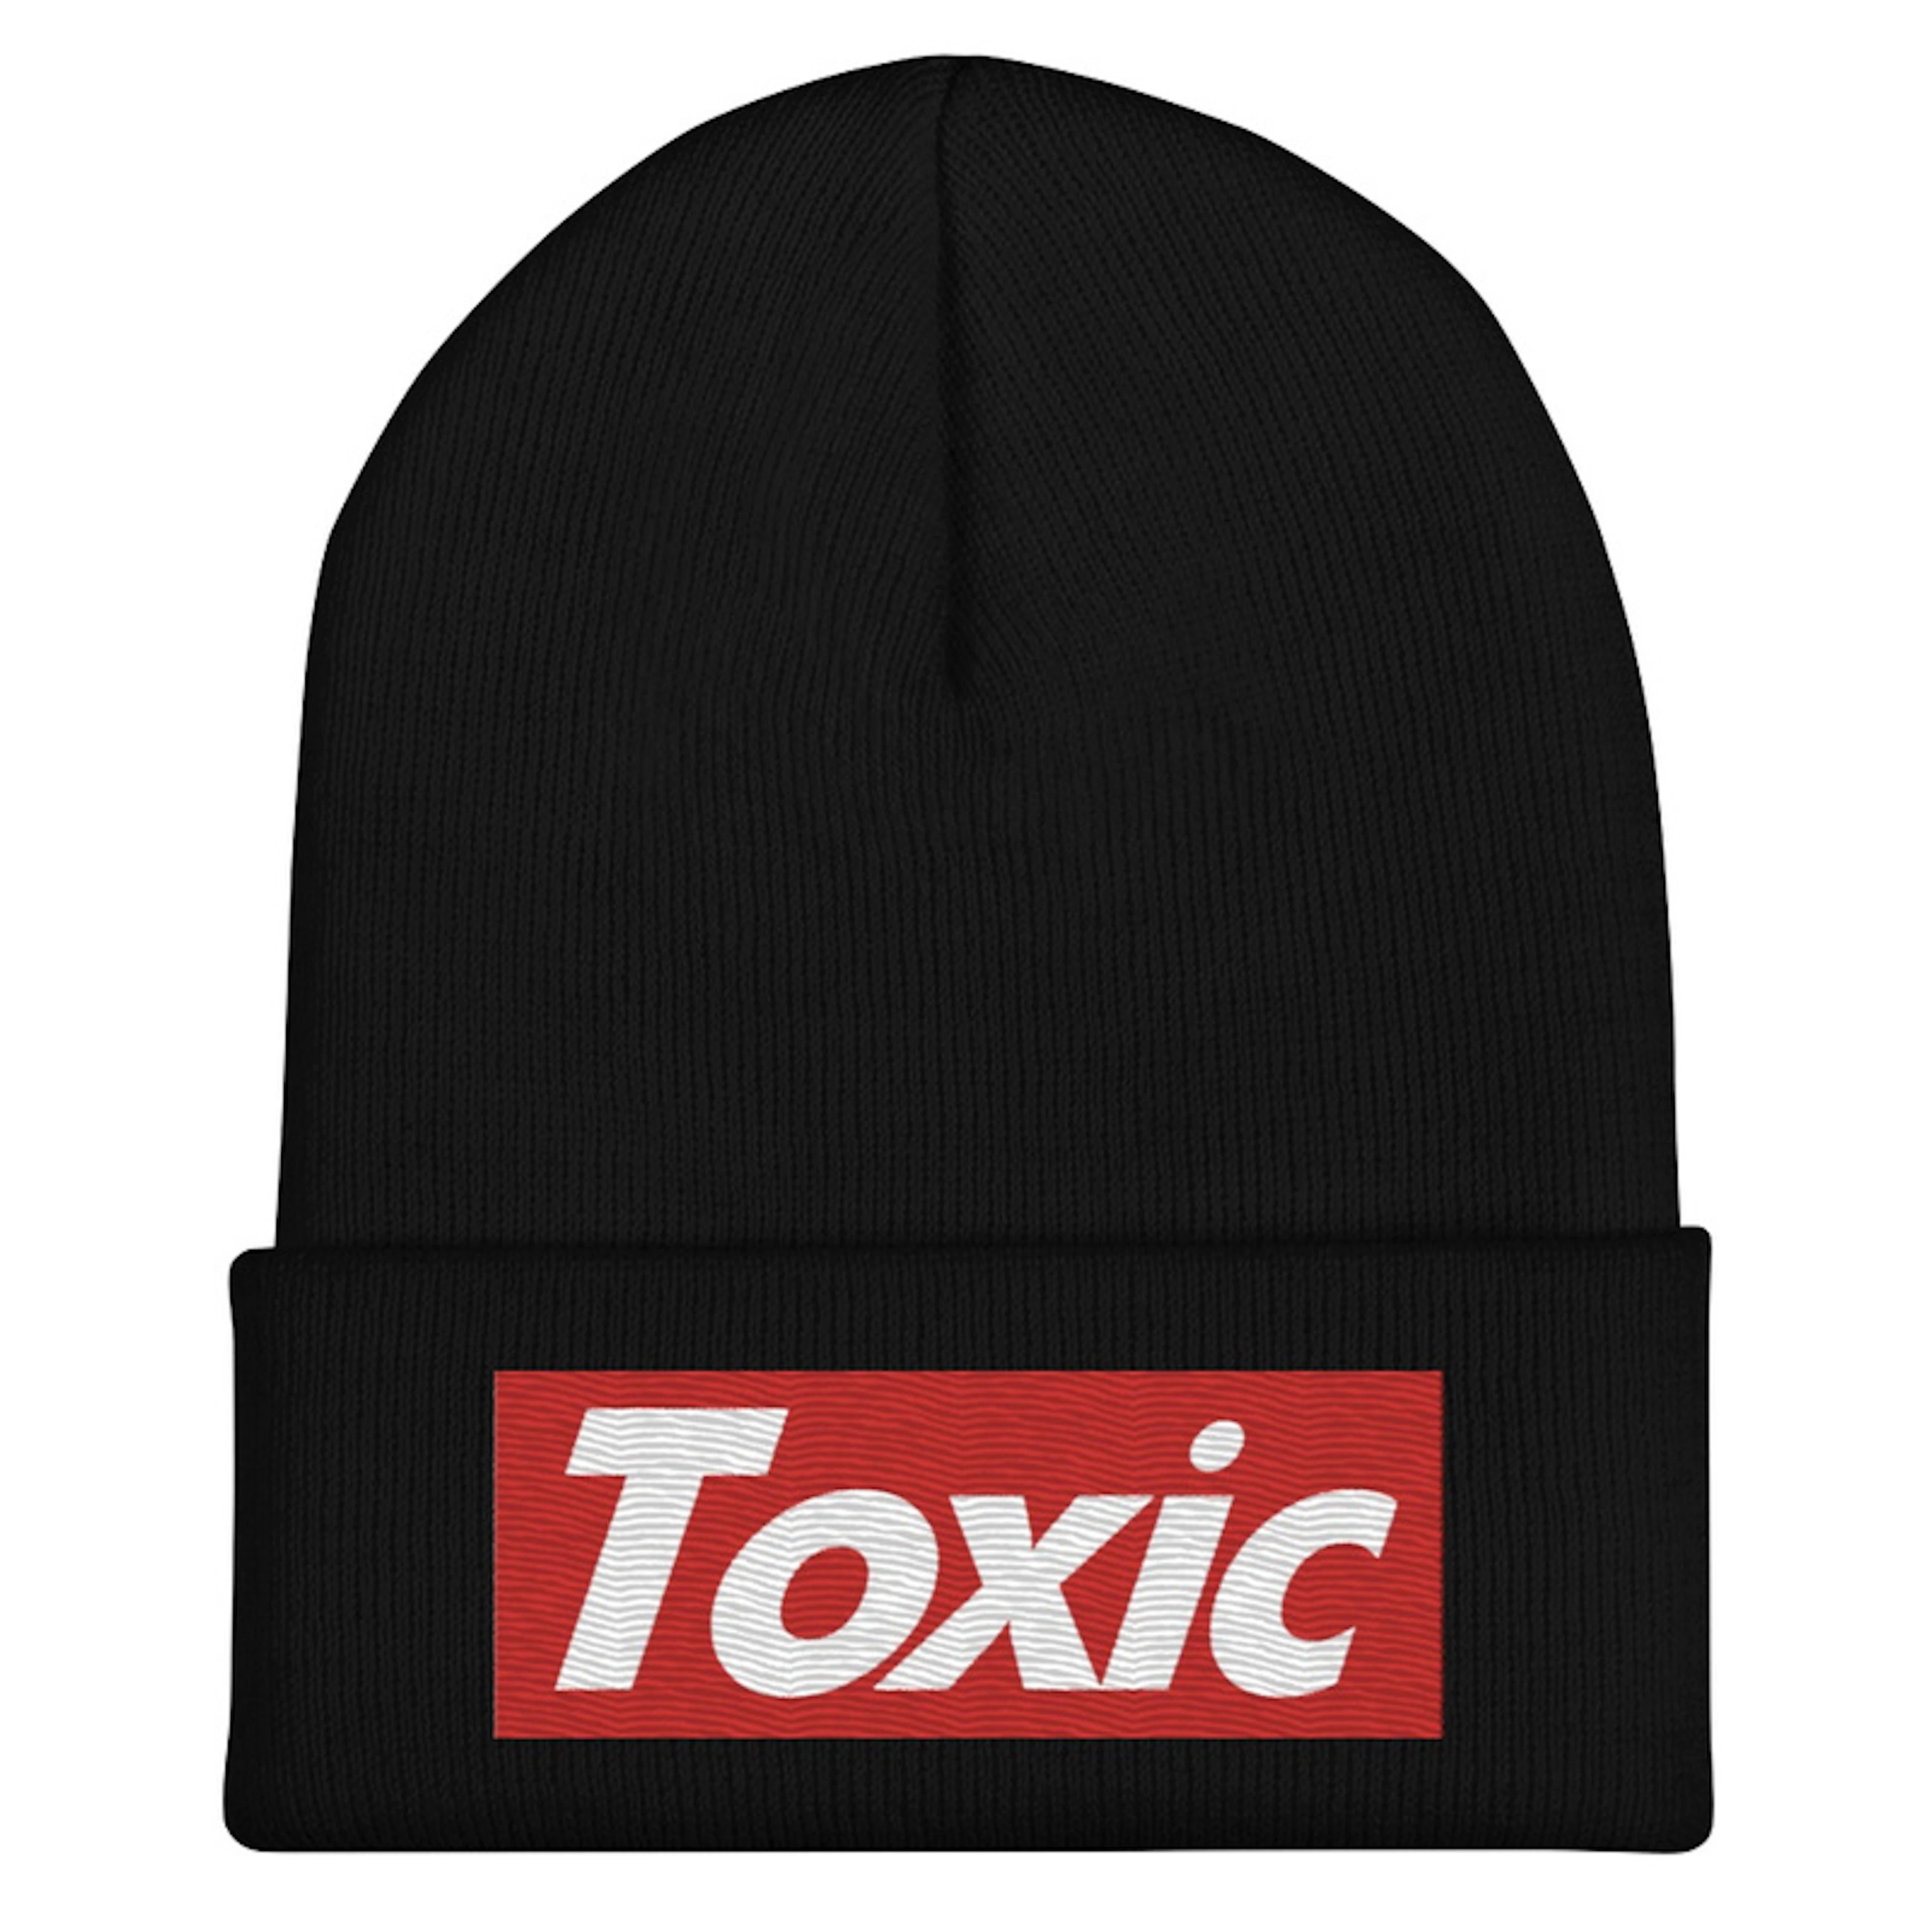 Embroidered TOXIC beanie